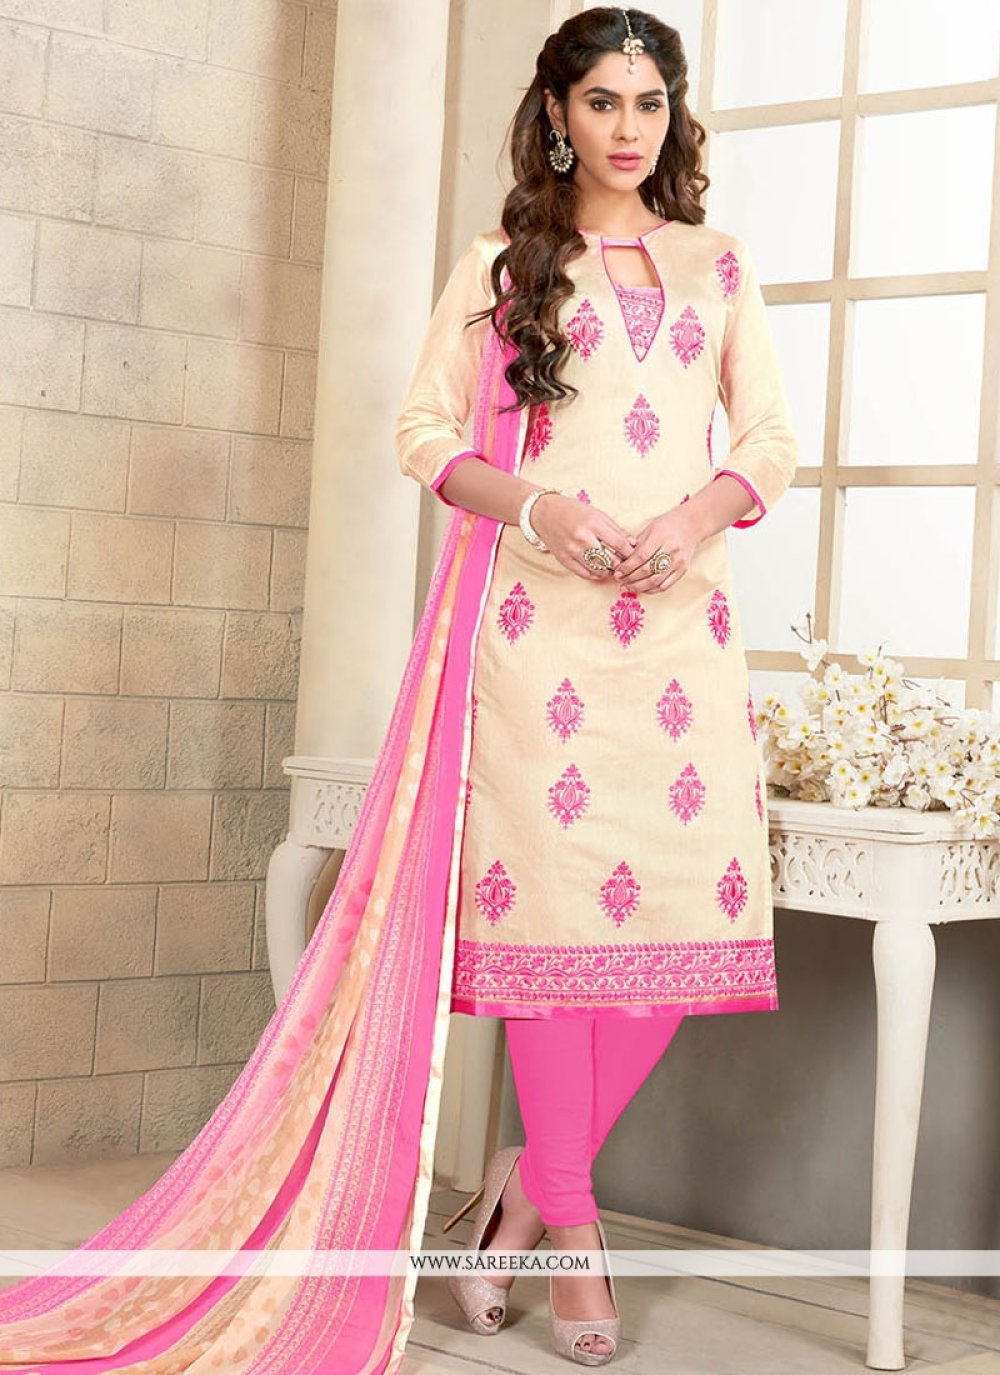 Buy Embroidered Work Chanderi Cotton Pink Churidar Suit Online at ...